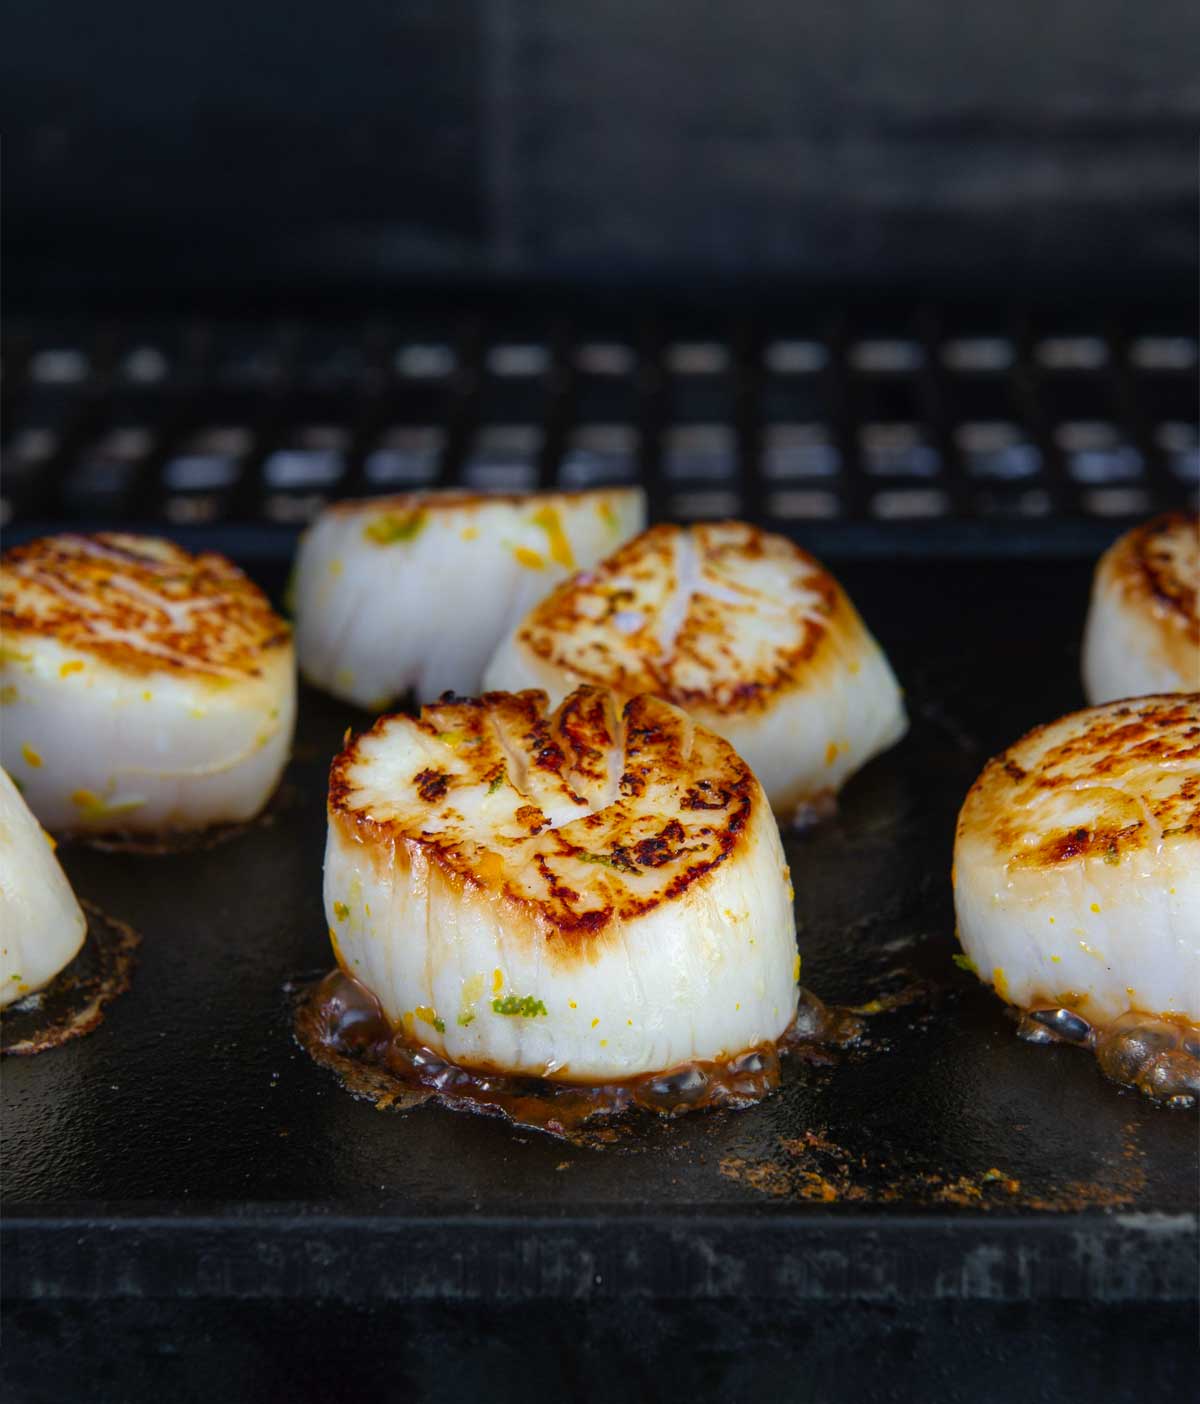 grilling scallops